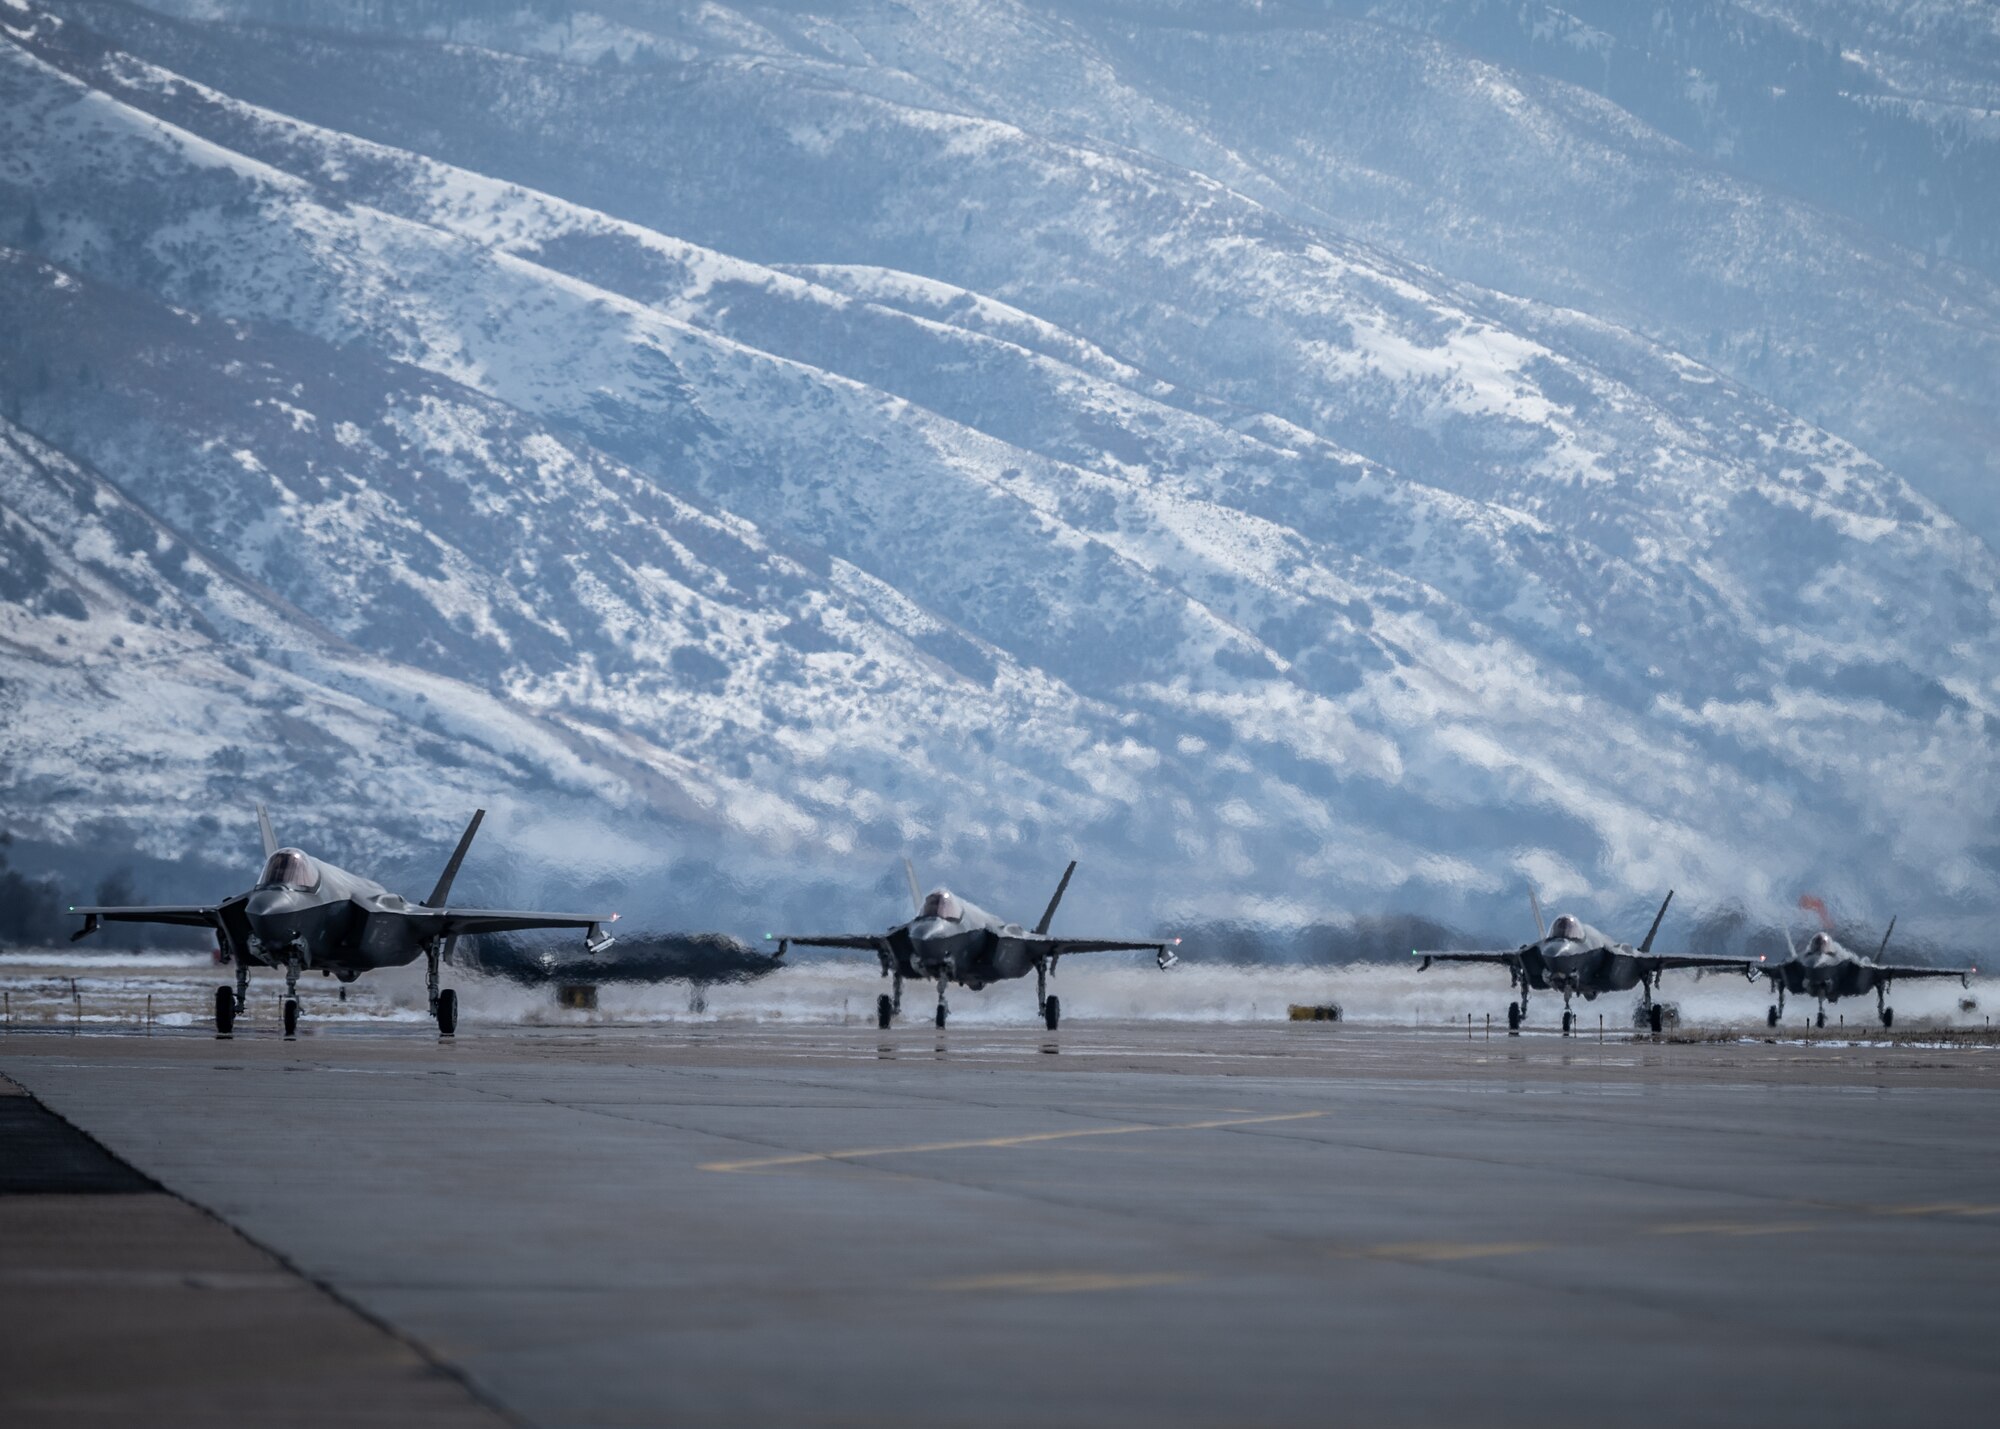 F-35s on a flightline with mountains in the background